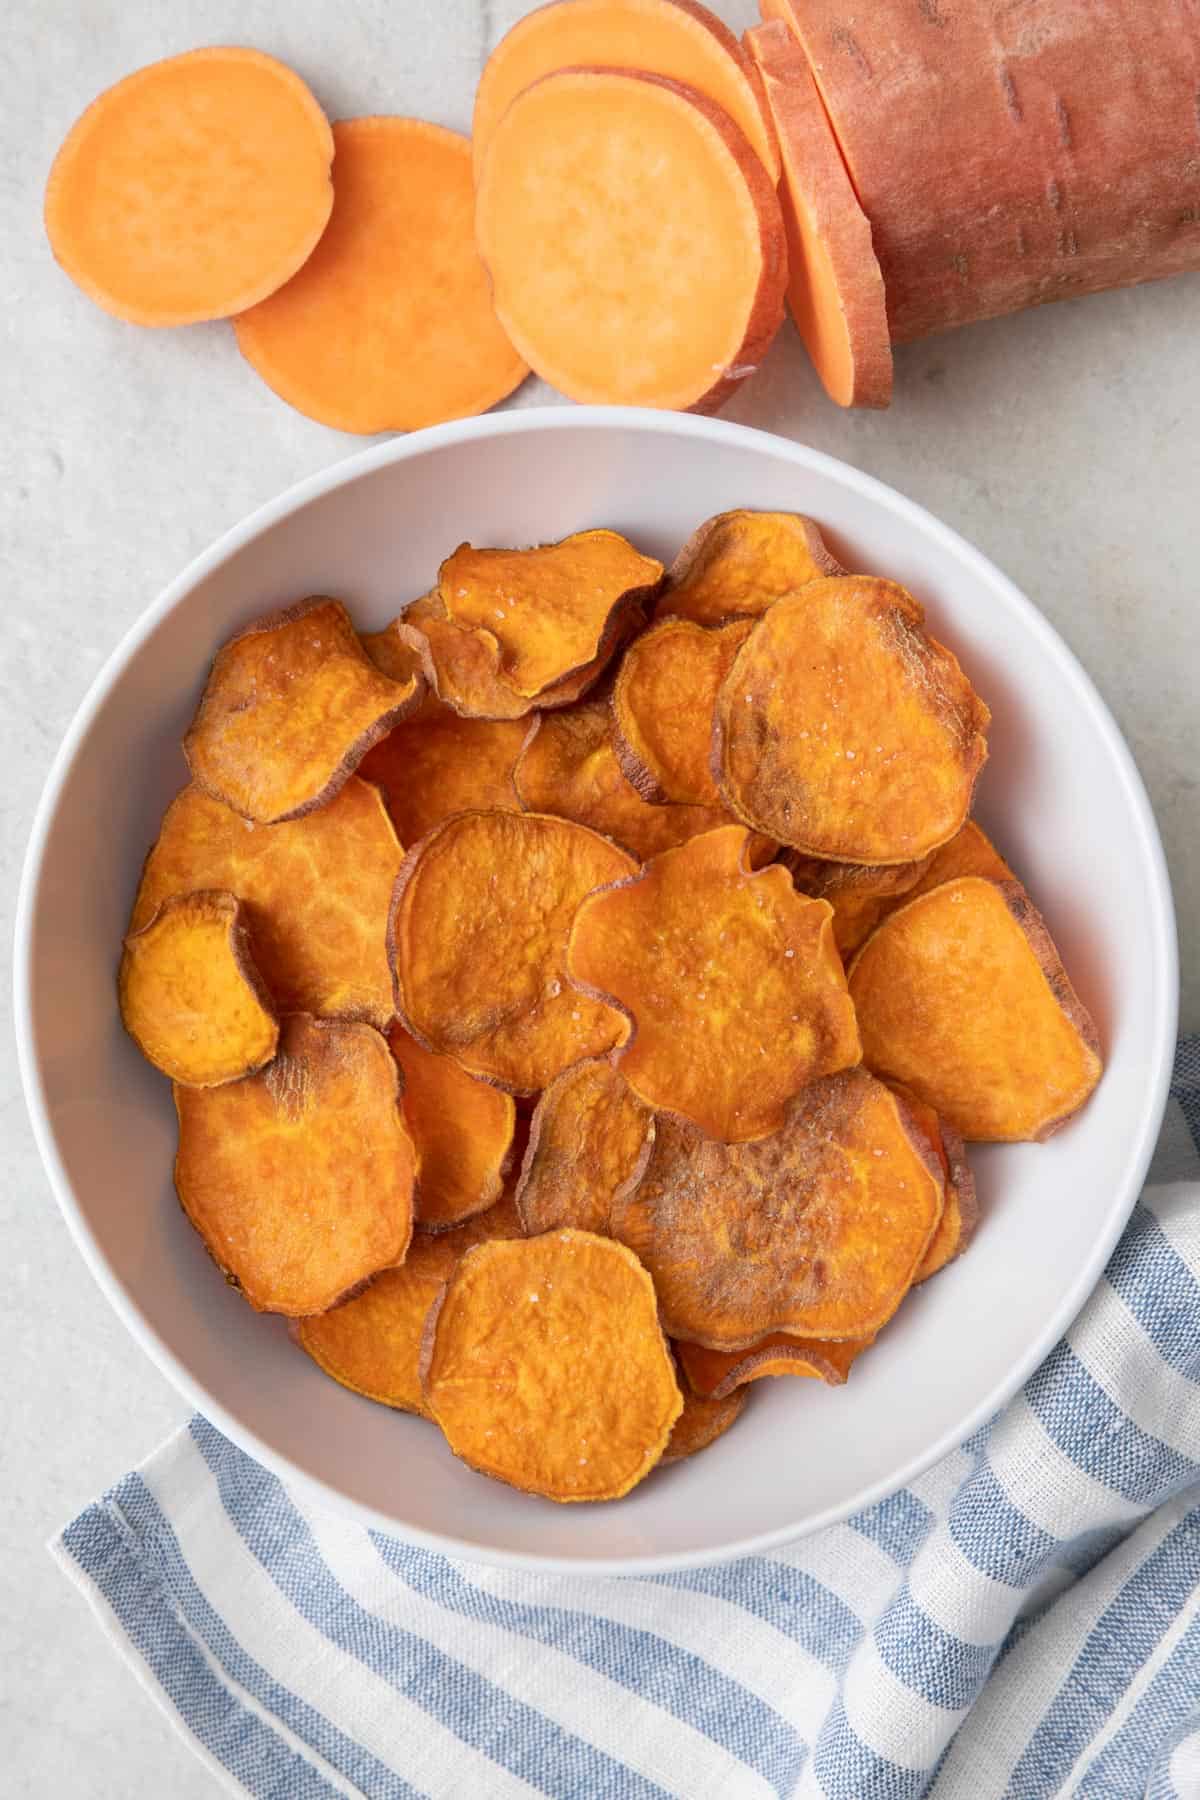 Bowl of sweet potato chips with a partial sliced sweet potato nearby.